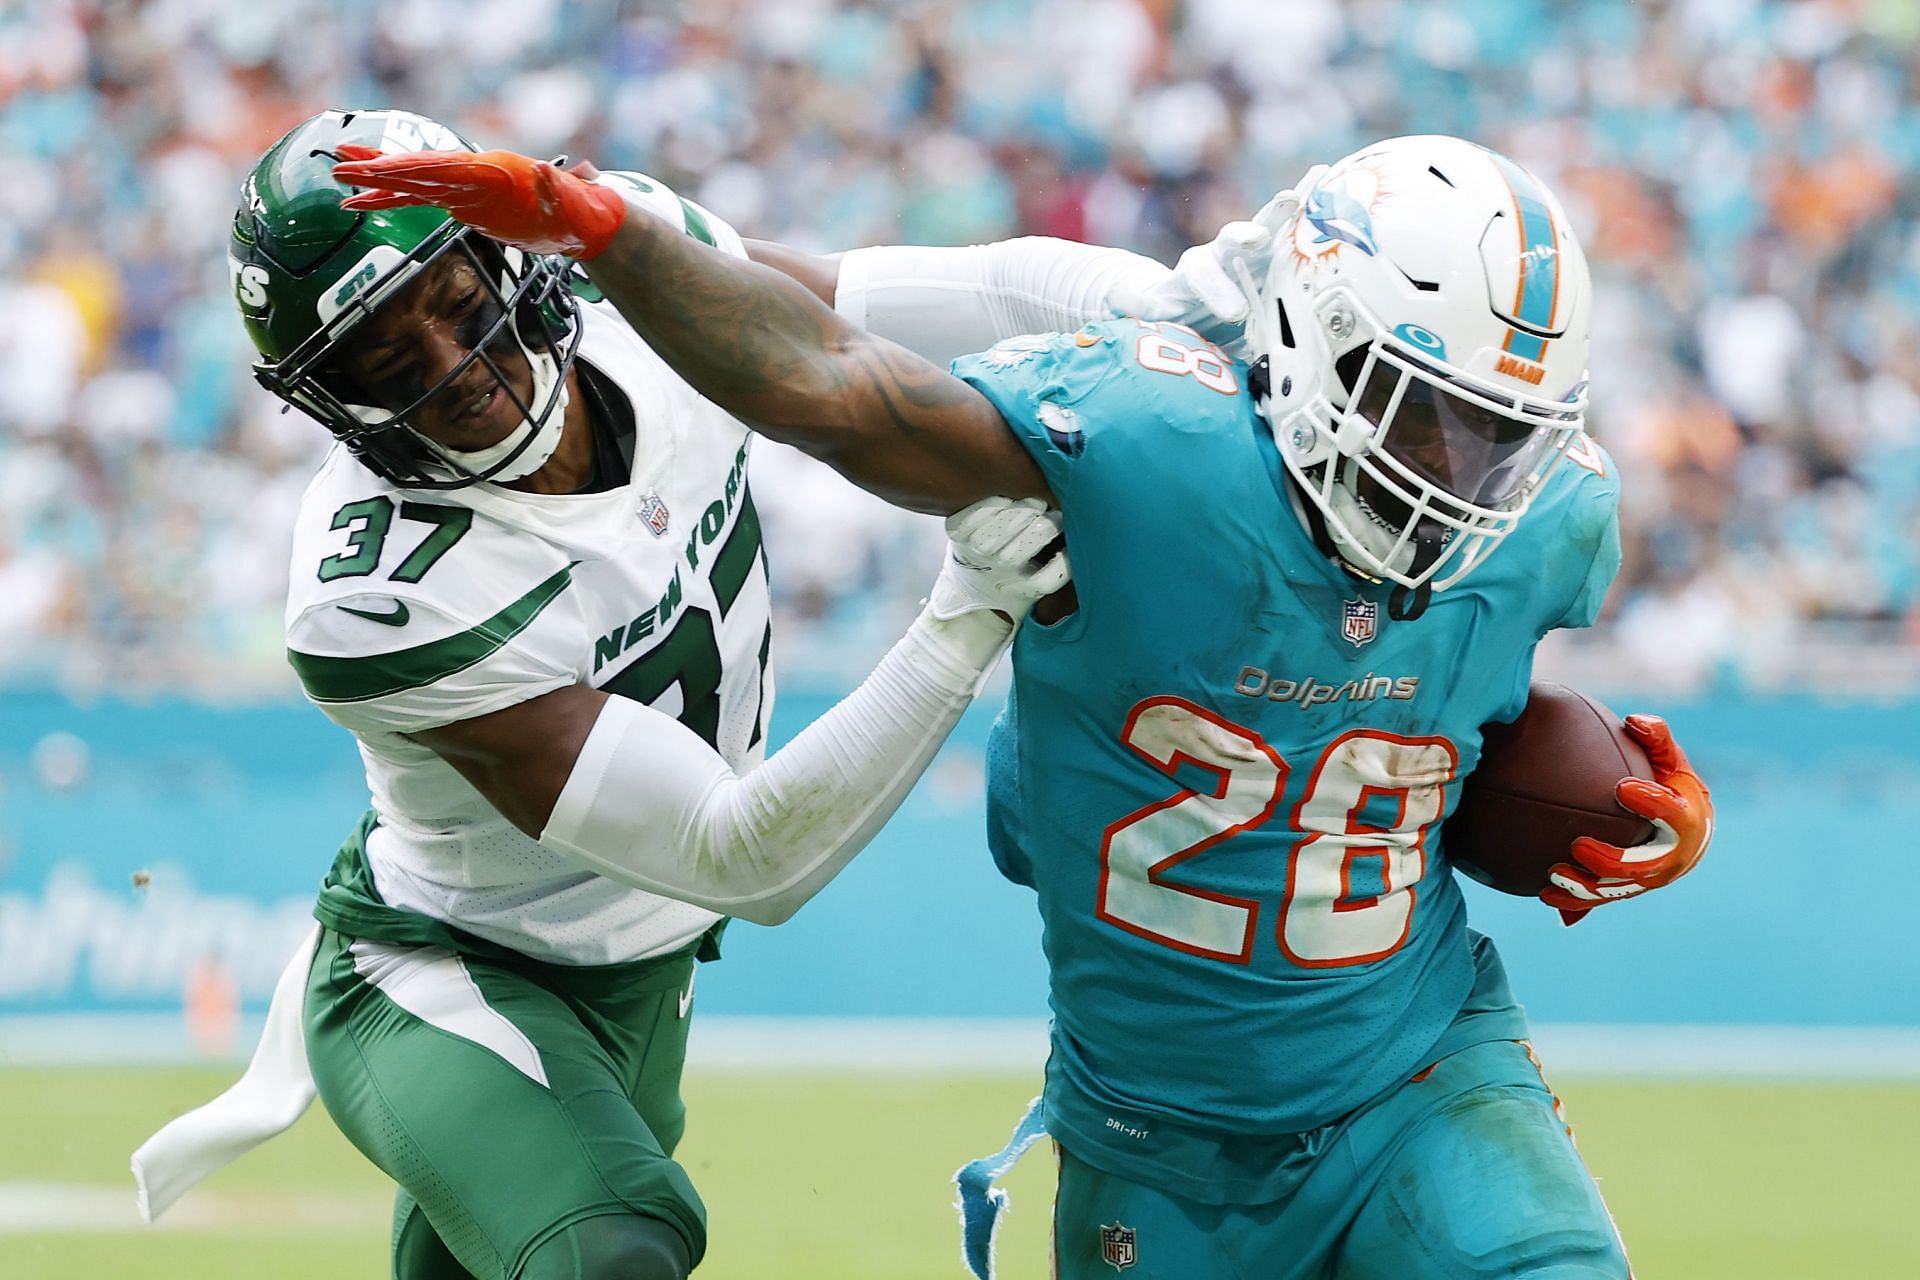 Formerly of the University of Miami, Duke Johnson (in blue) came big for Miami in their AFC East matchup with the Jets on Sunday (Photo: Getty)